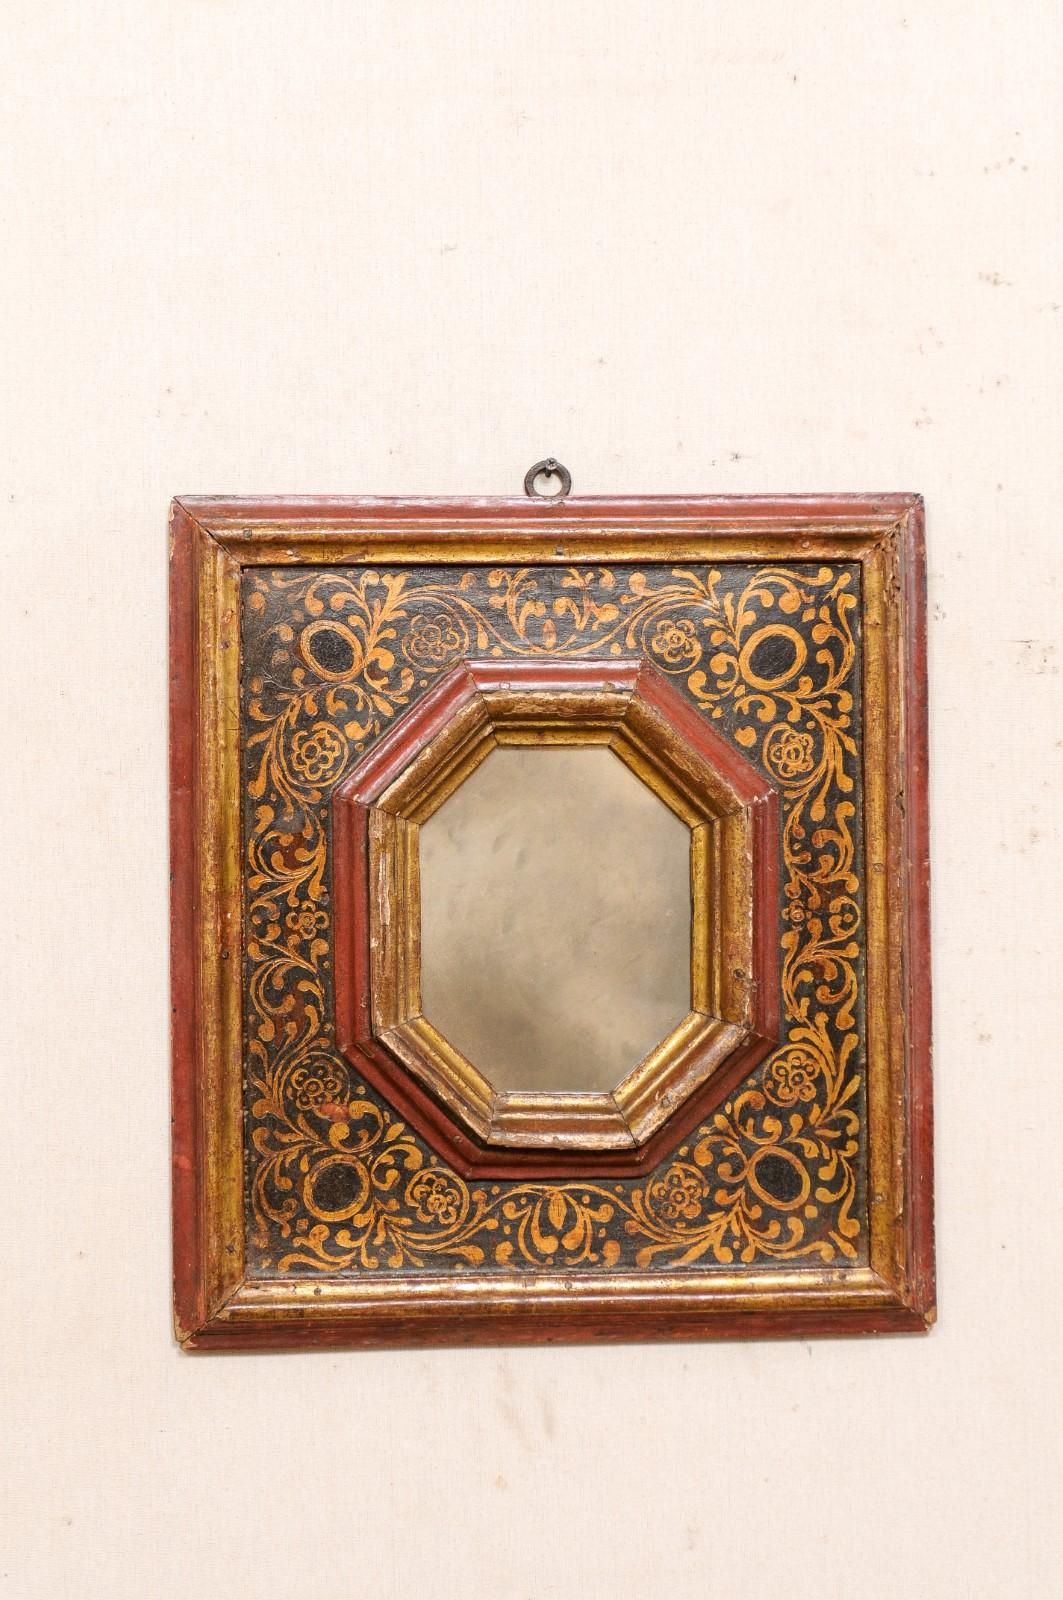 A Spanish hand-painted accent mirror from the 18th century. This antique wall decoration from Spain is nearly-square in shape, with a molded frame, with an inner surround adorn in a hand-painted scrolling leaf motif, about a central mirror housed